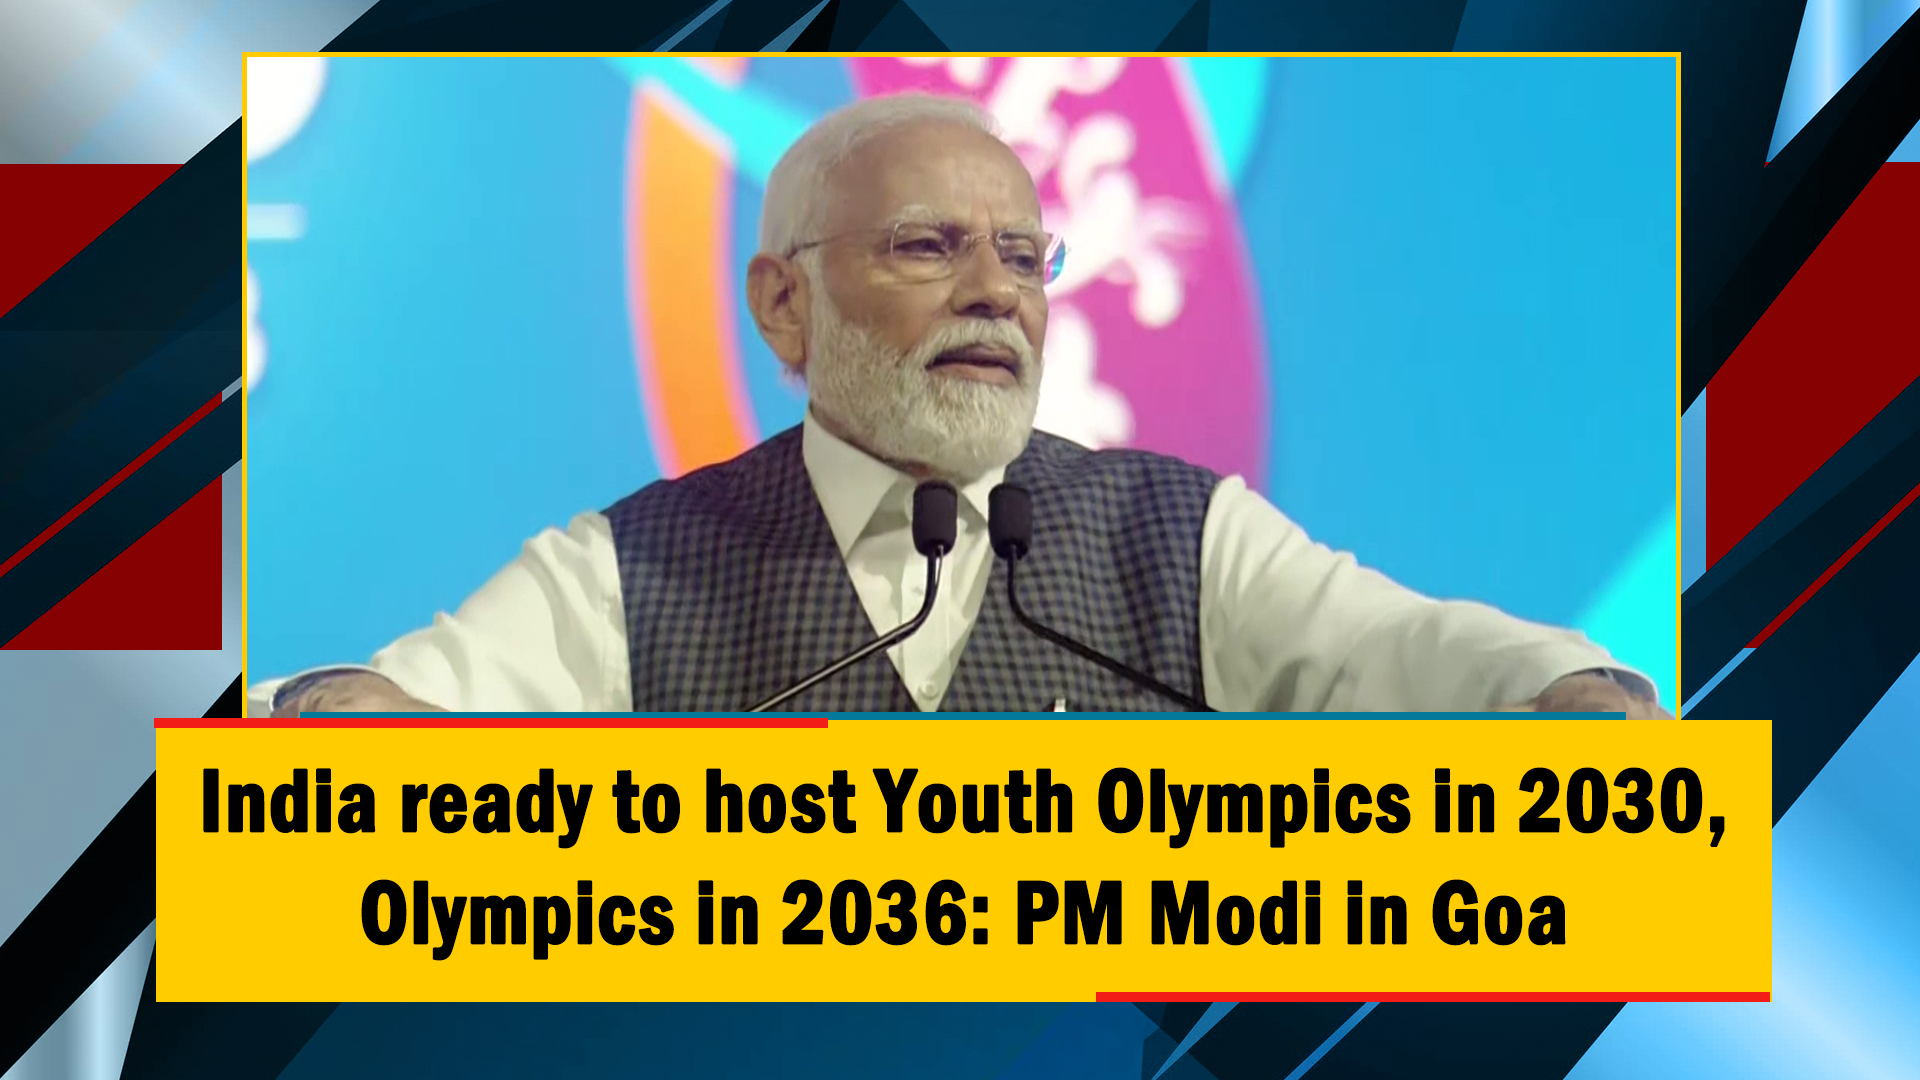 India ready to host Youth Olympics in 2030, Olympics in 2036: PM Narendra Modi in Goa